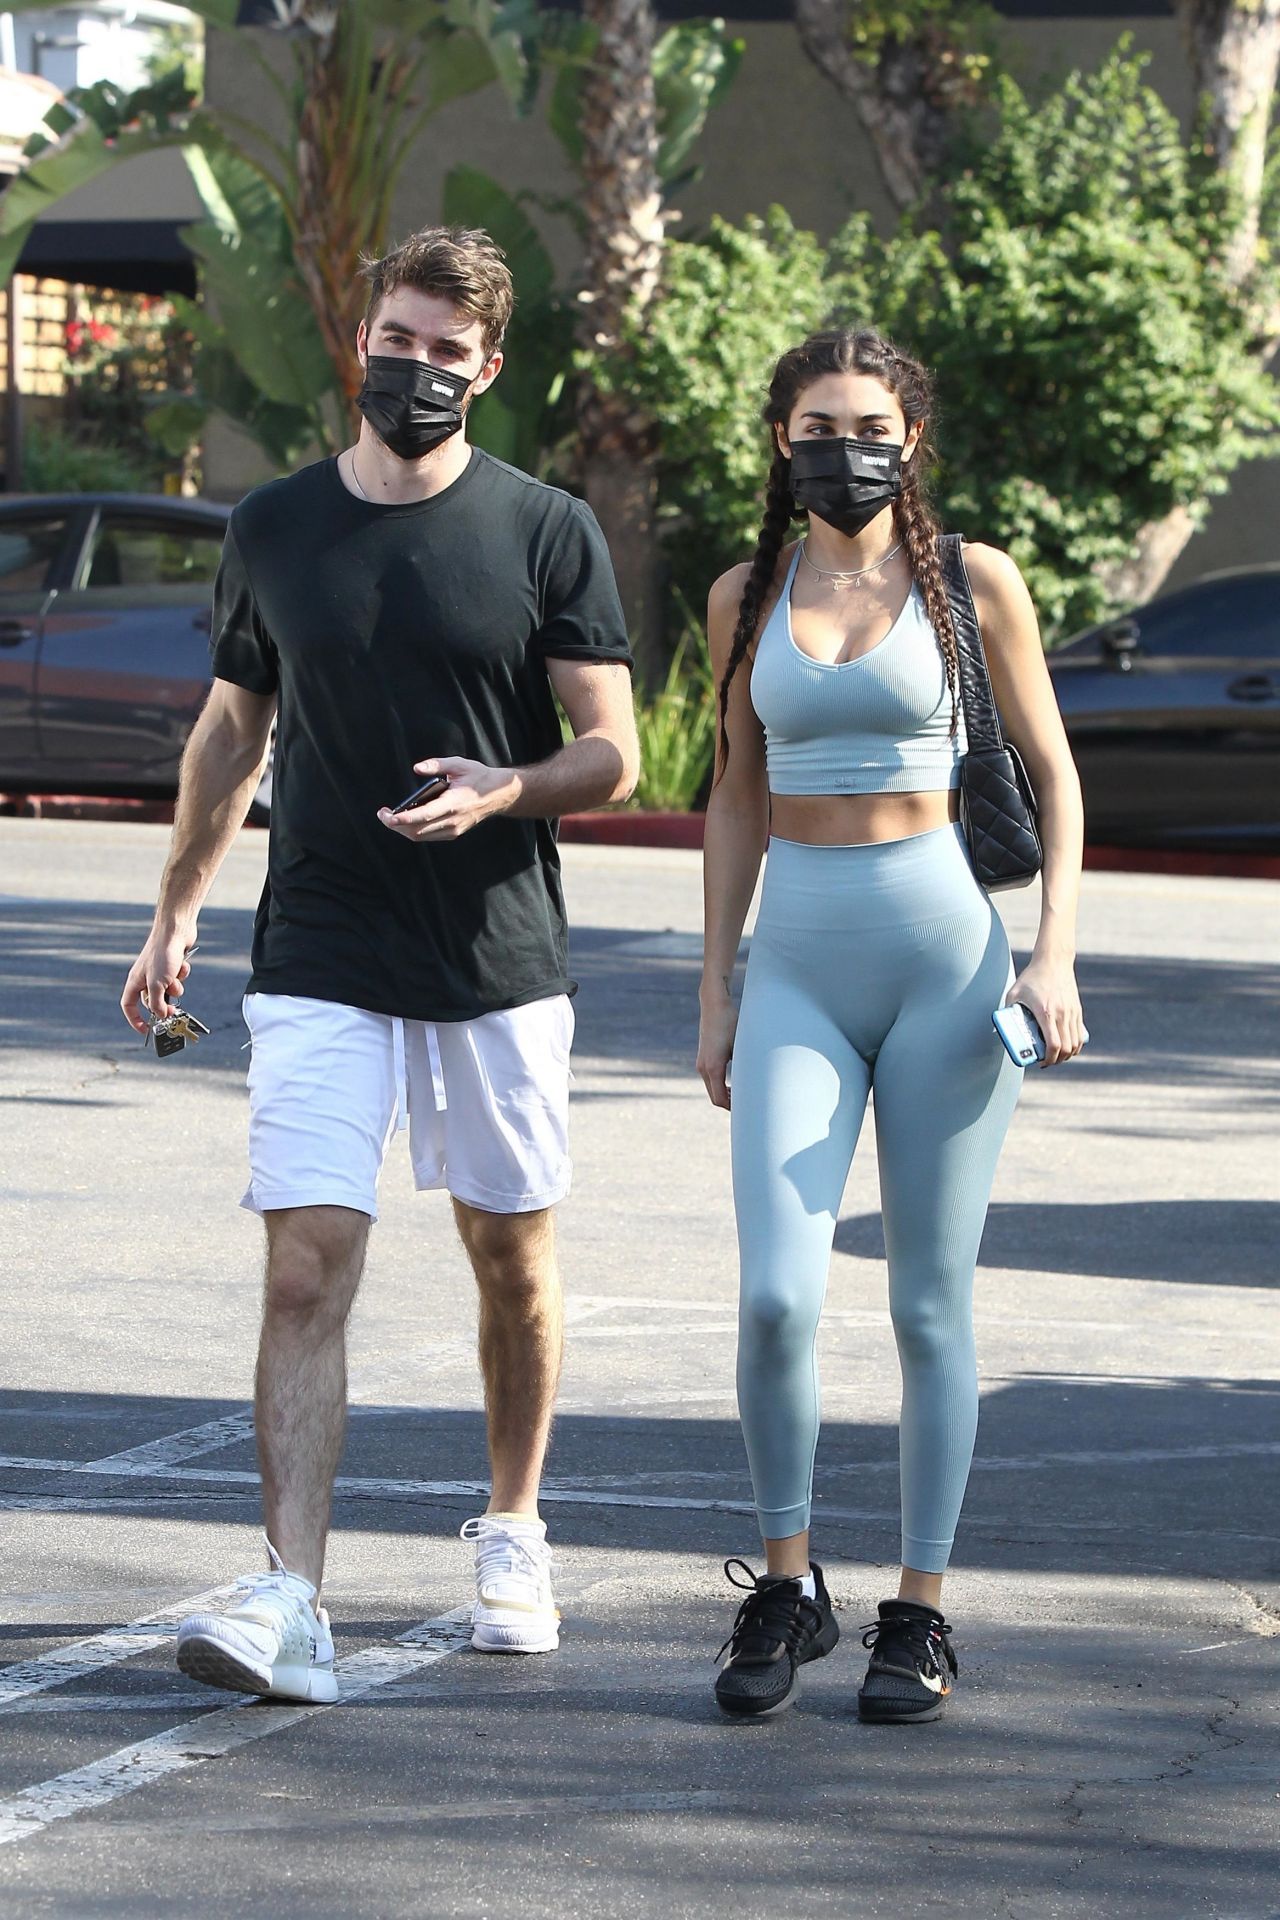 https://celebmafia.com/wp-content/uploads/2020/11/chantel-jeffries-and-andrew-taggart-out-in-la-11-18-2020-5.jpg